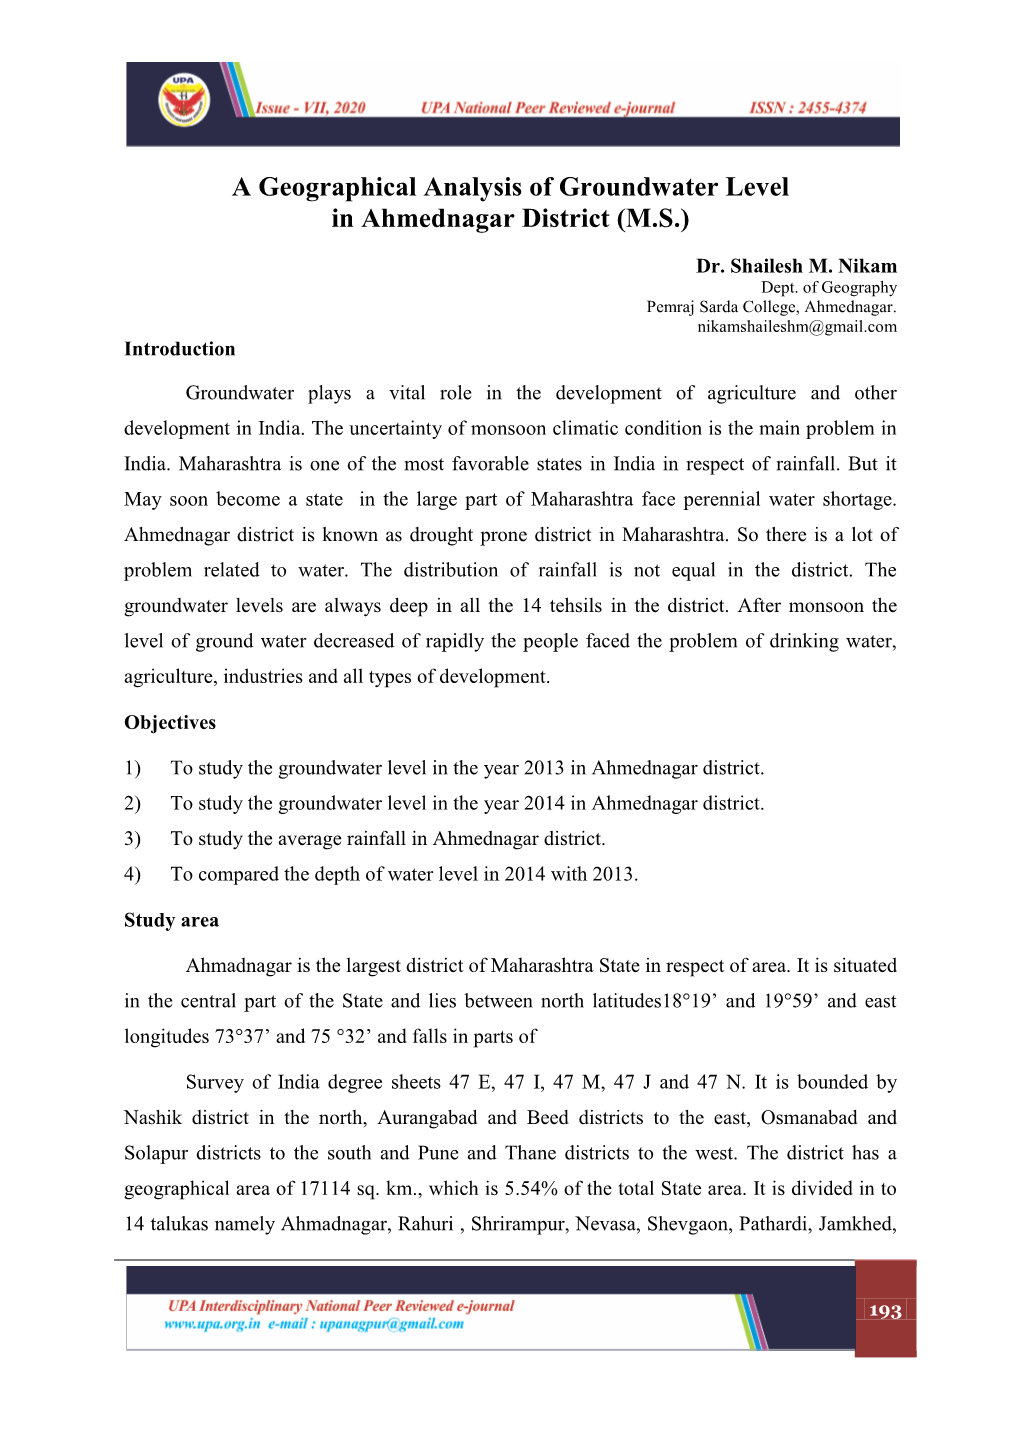 A Geographical Analysis of Groundwater Level in Ahmednagar District (M.S.)